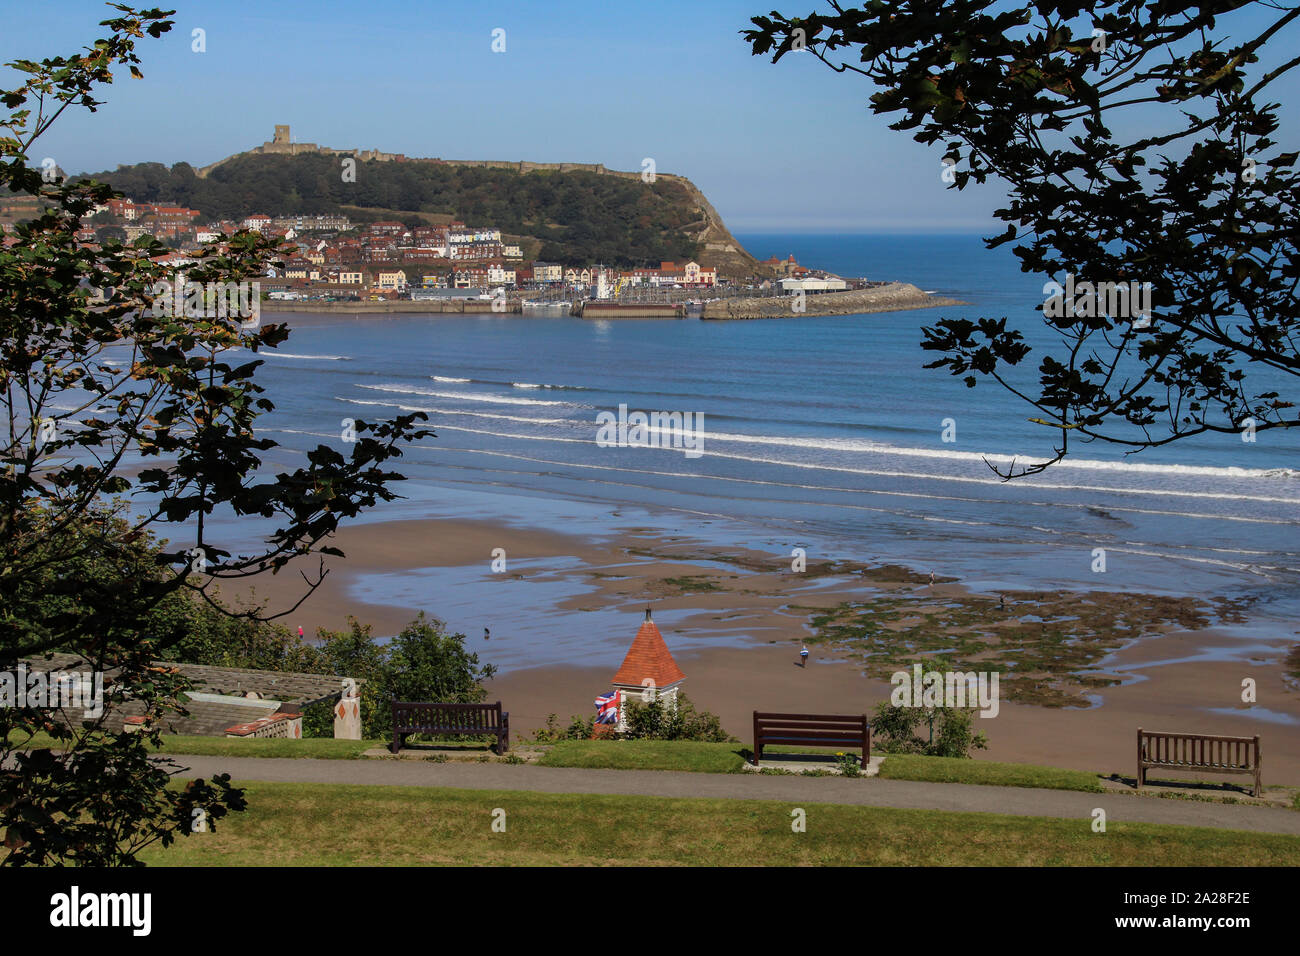 Scarborough. United Kingdom. 09.19.19. The ruins of Scarborough Castle on the headland above the seaside resort of Scarborough on the North Yorkshire Stock Photo